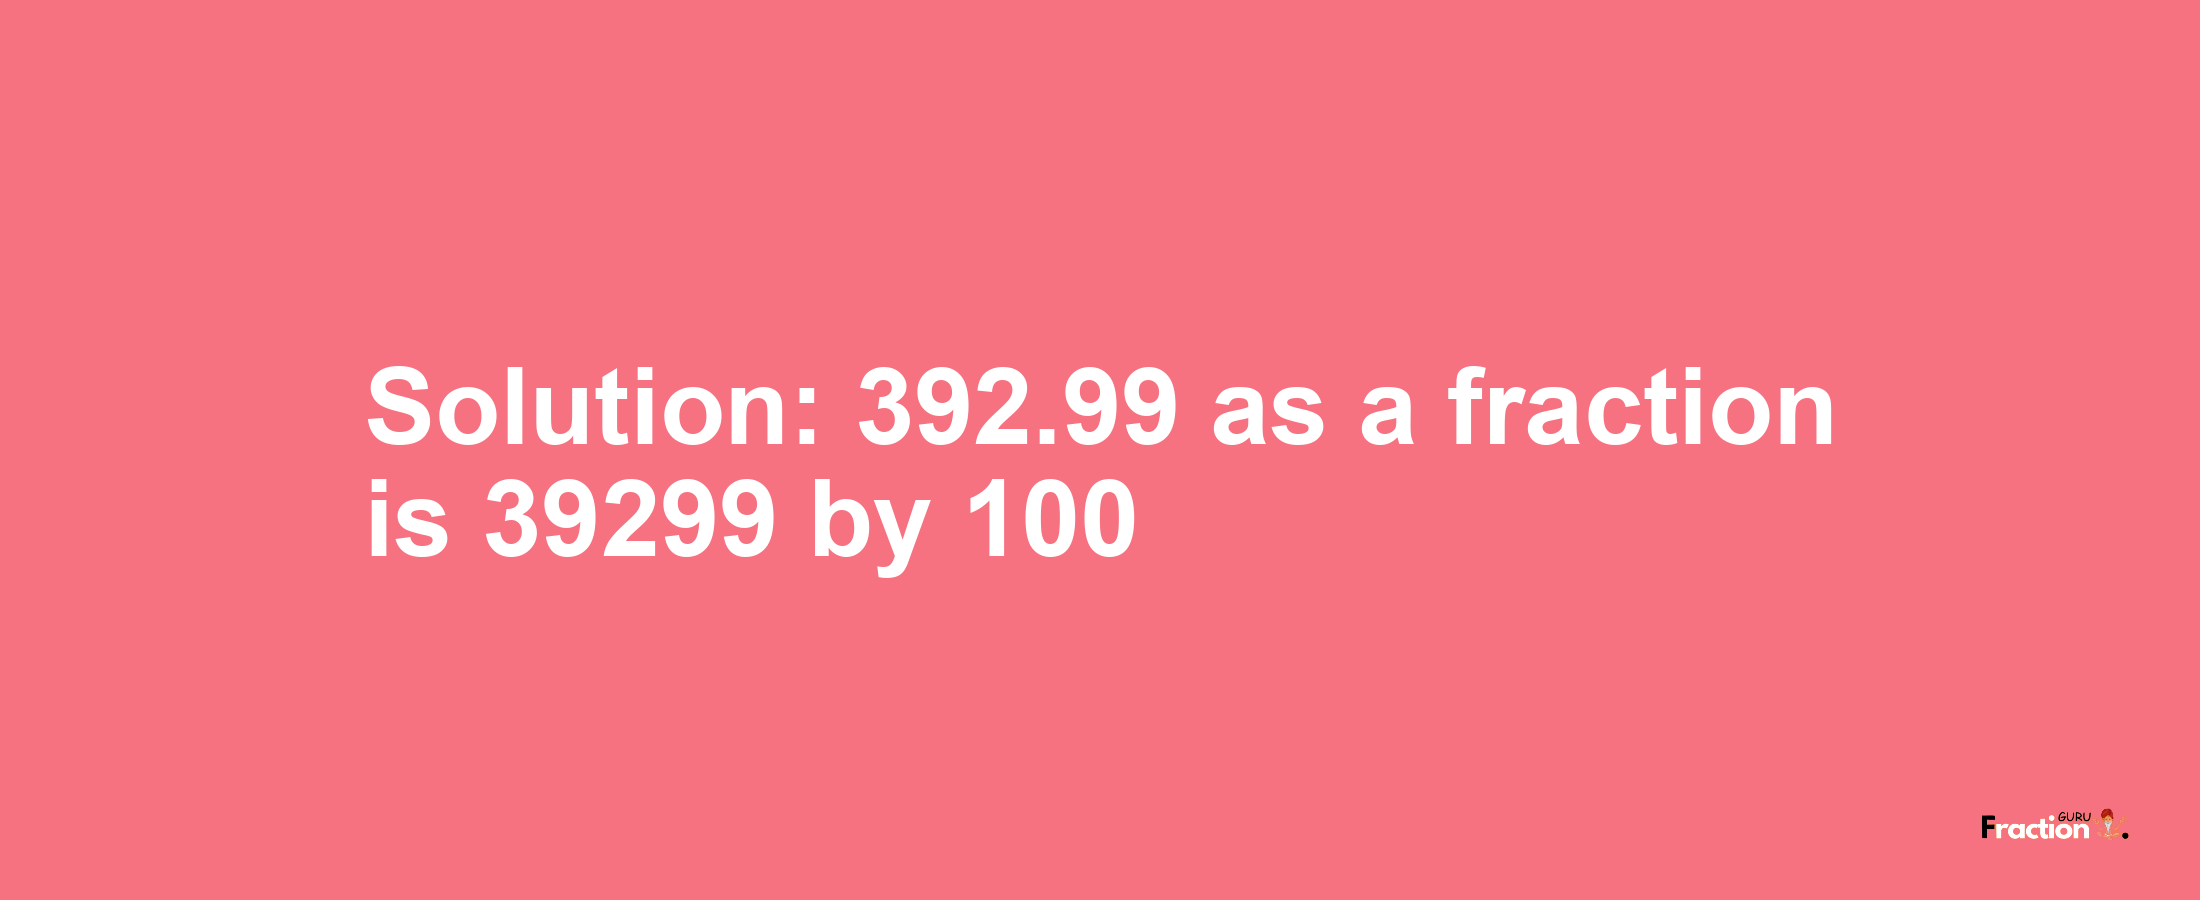 Solution:392.99 as a fraction is 39299/100